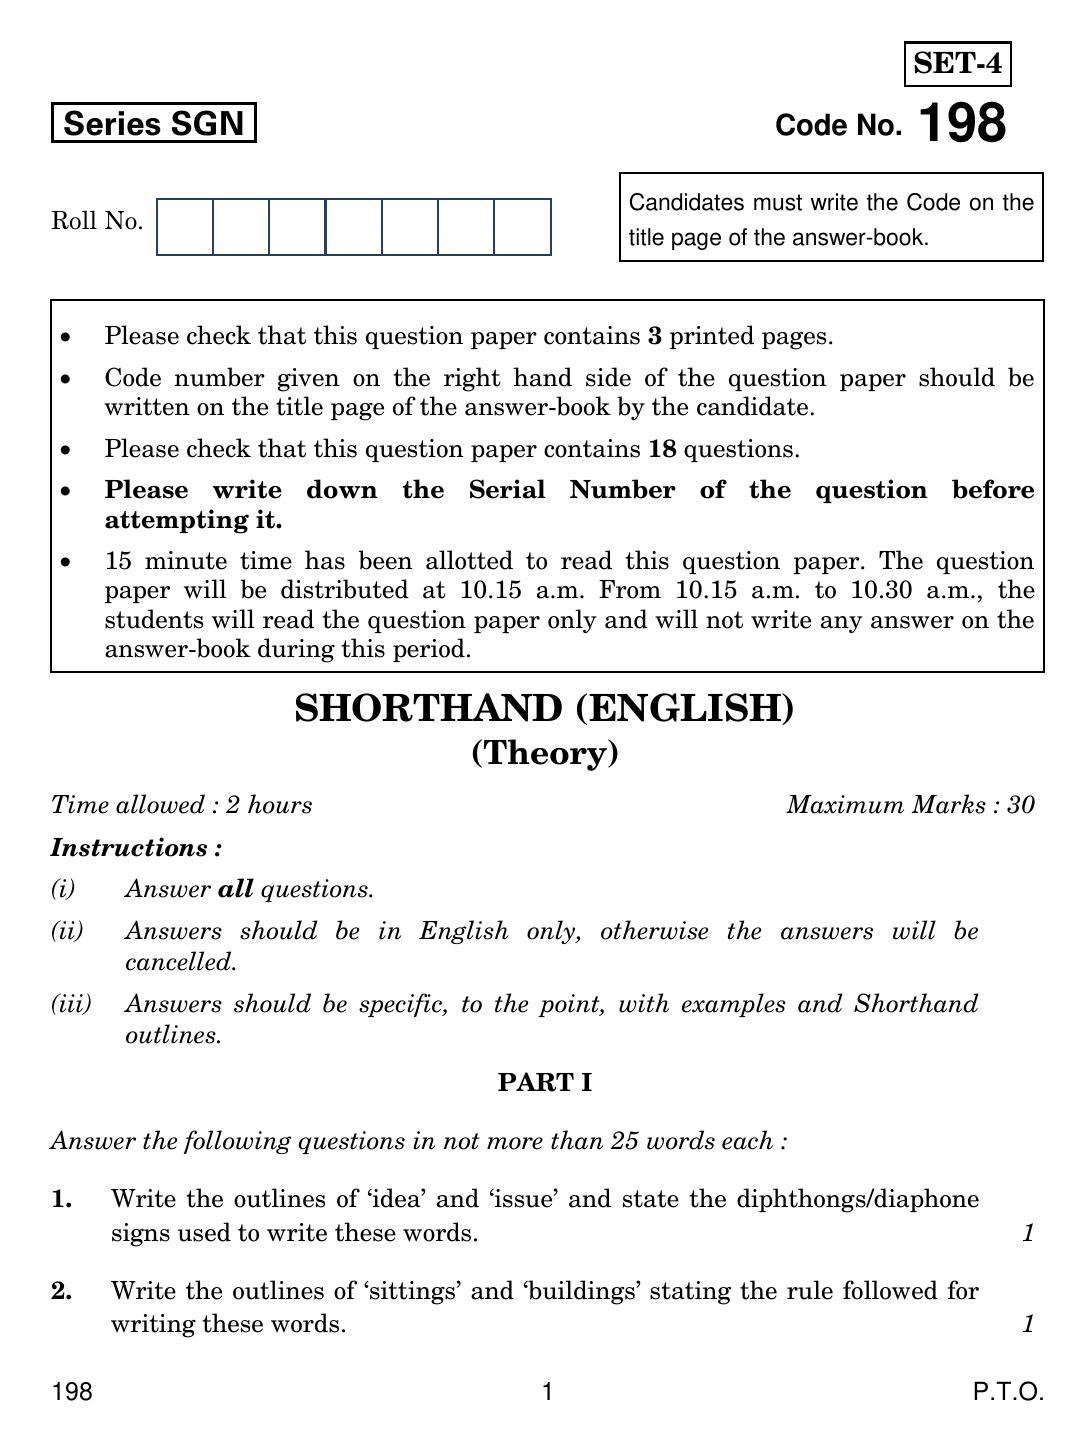 CBSE Class 12 198 SHORTHAND ENGLISH 2018 Question Paper - Page 1